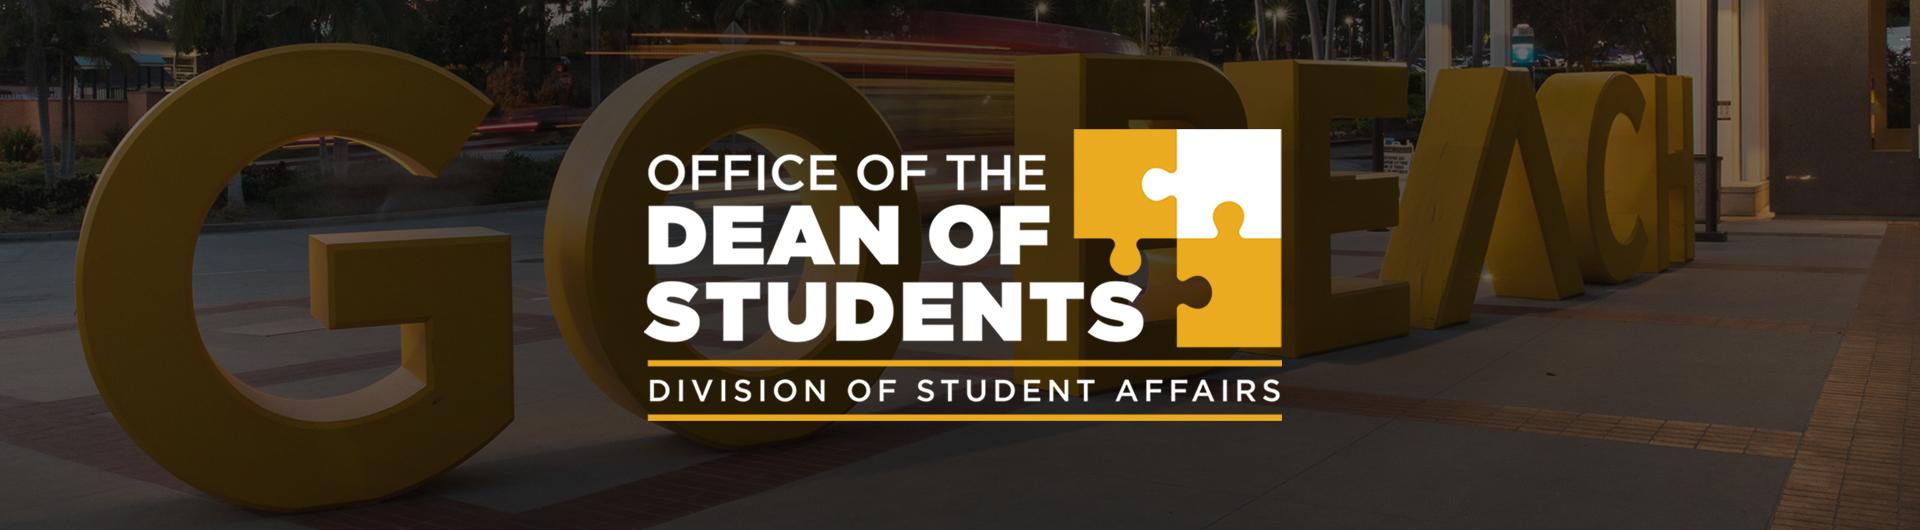 Contact Dean of Students California State University Long Beach